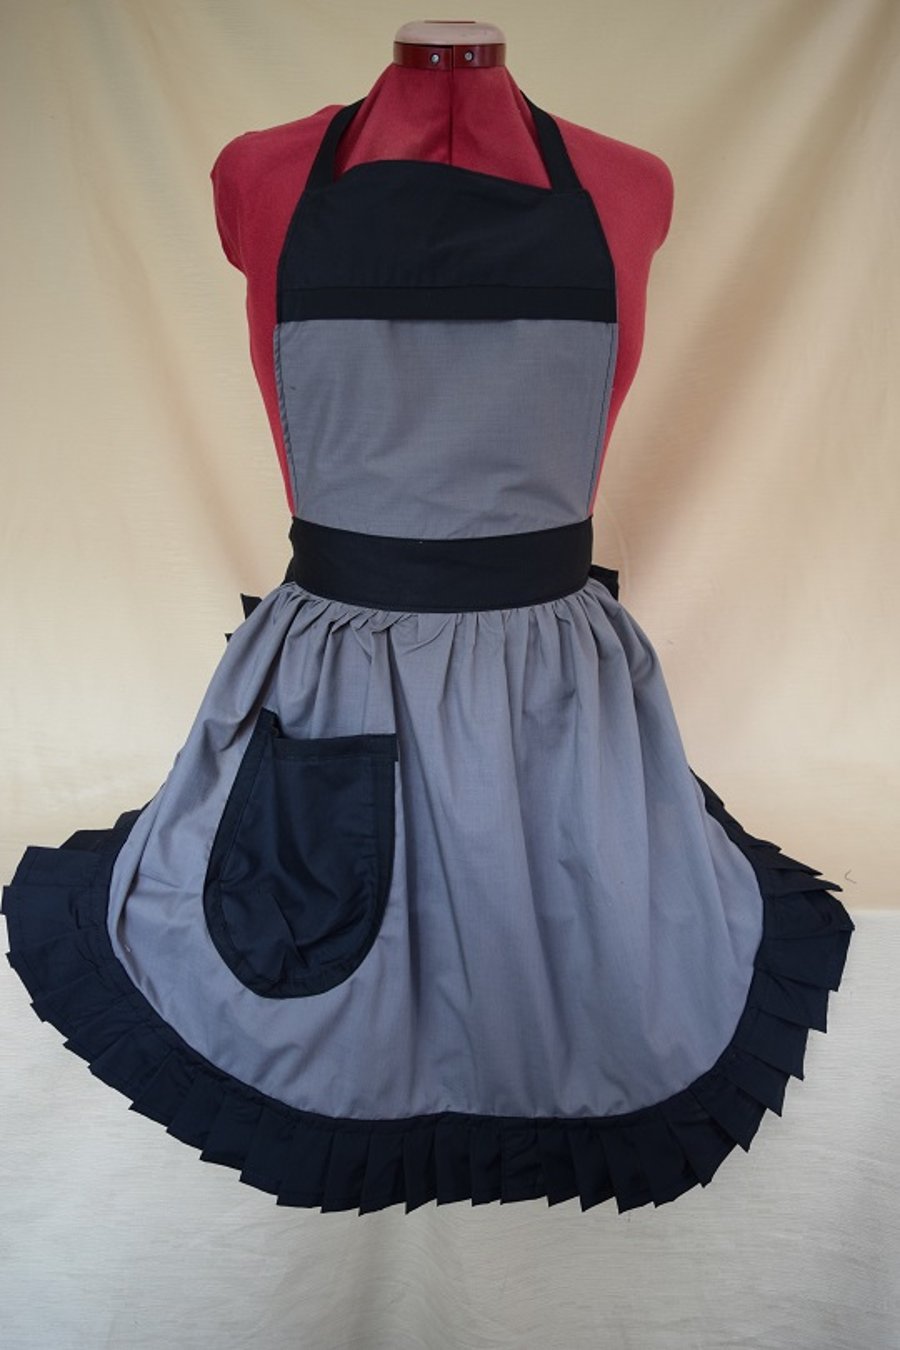 Vintage 50s Style Full Apron Pinny - Grey with Black Trim